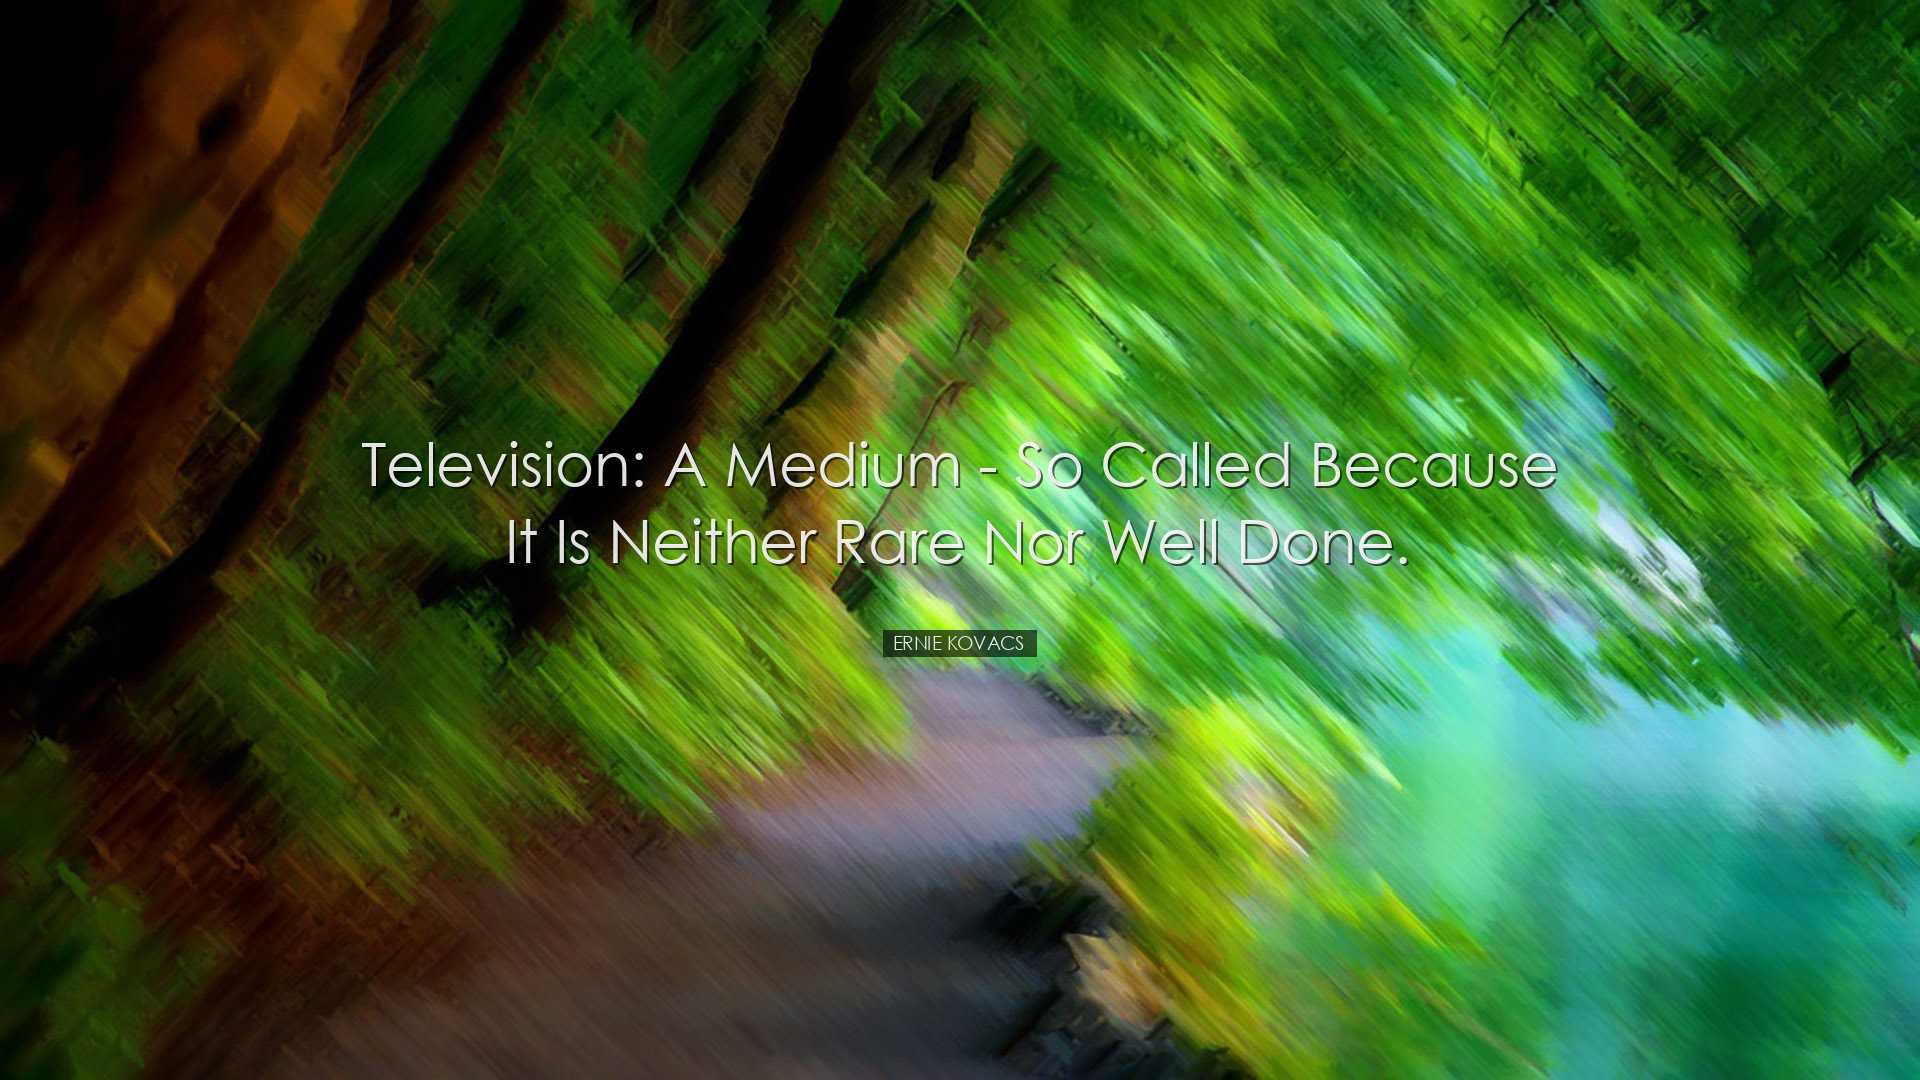 Television: A medium - so called because it is neither rare nor we